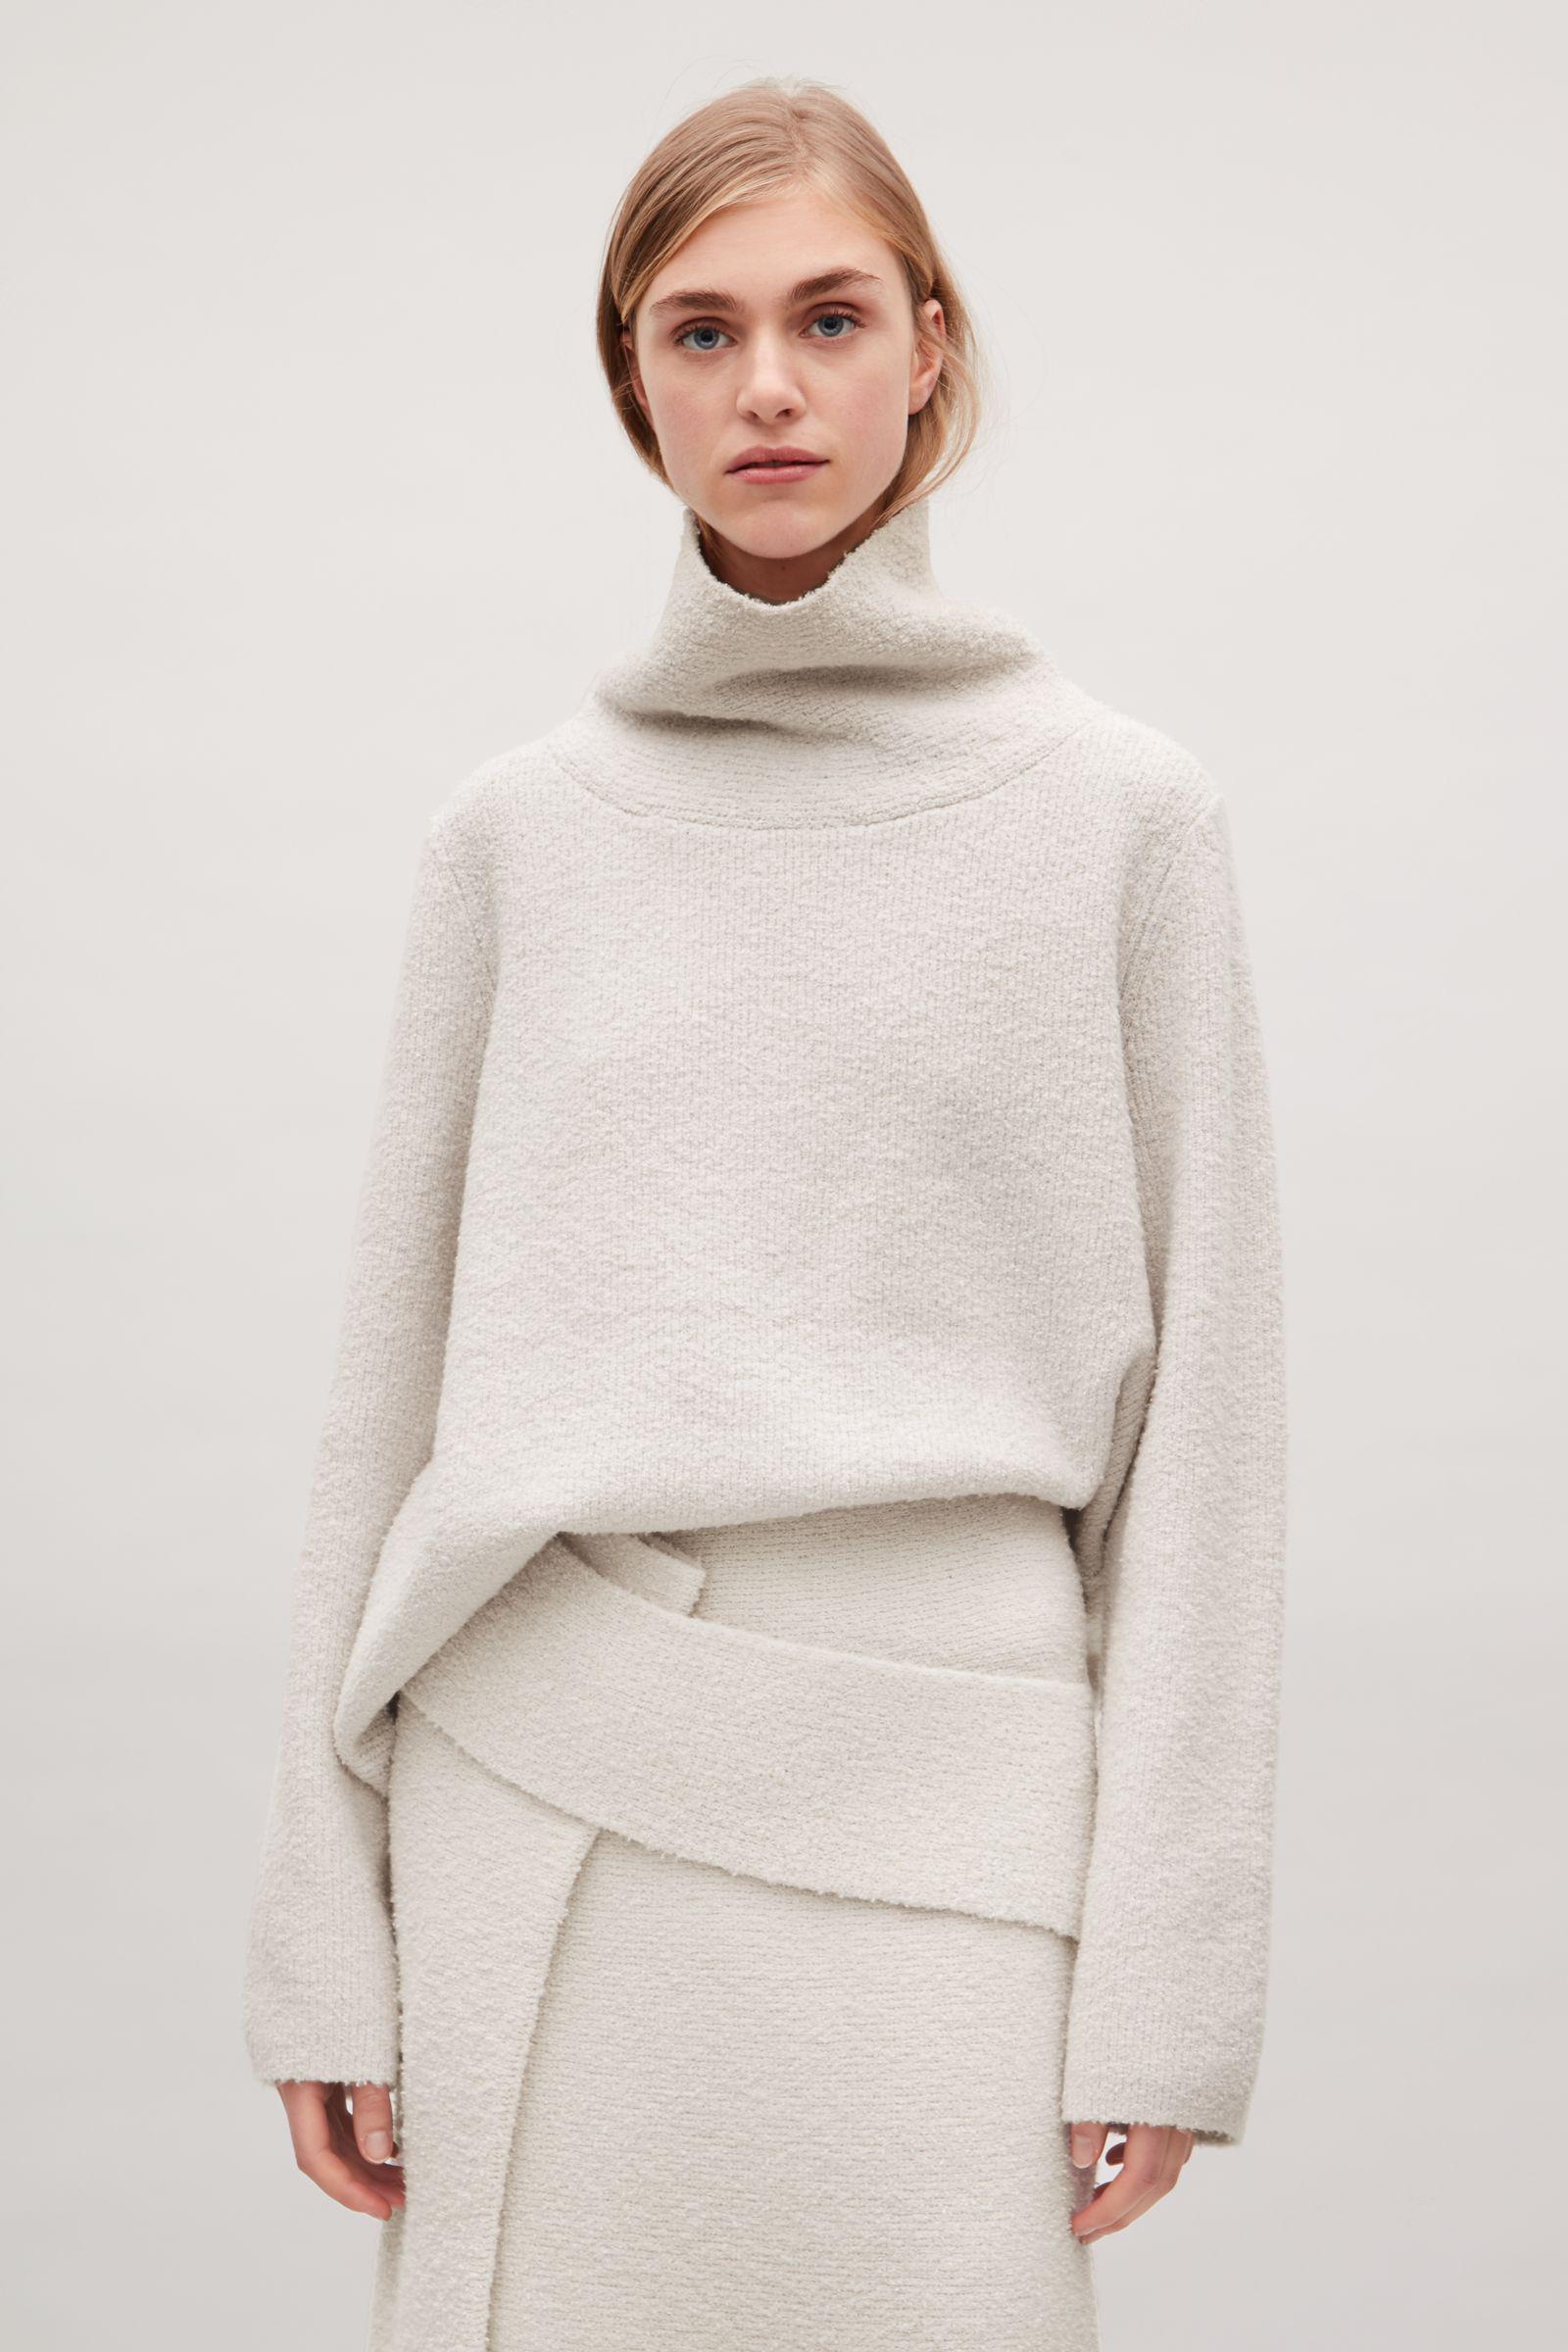 COS High-neck Wool Jumper in Ivory (White) | Lyst